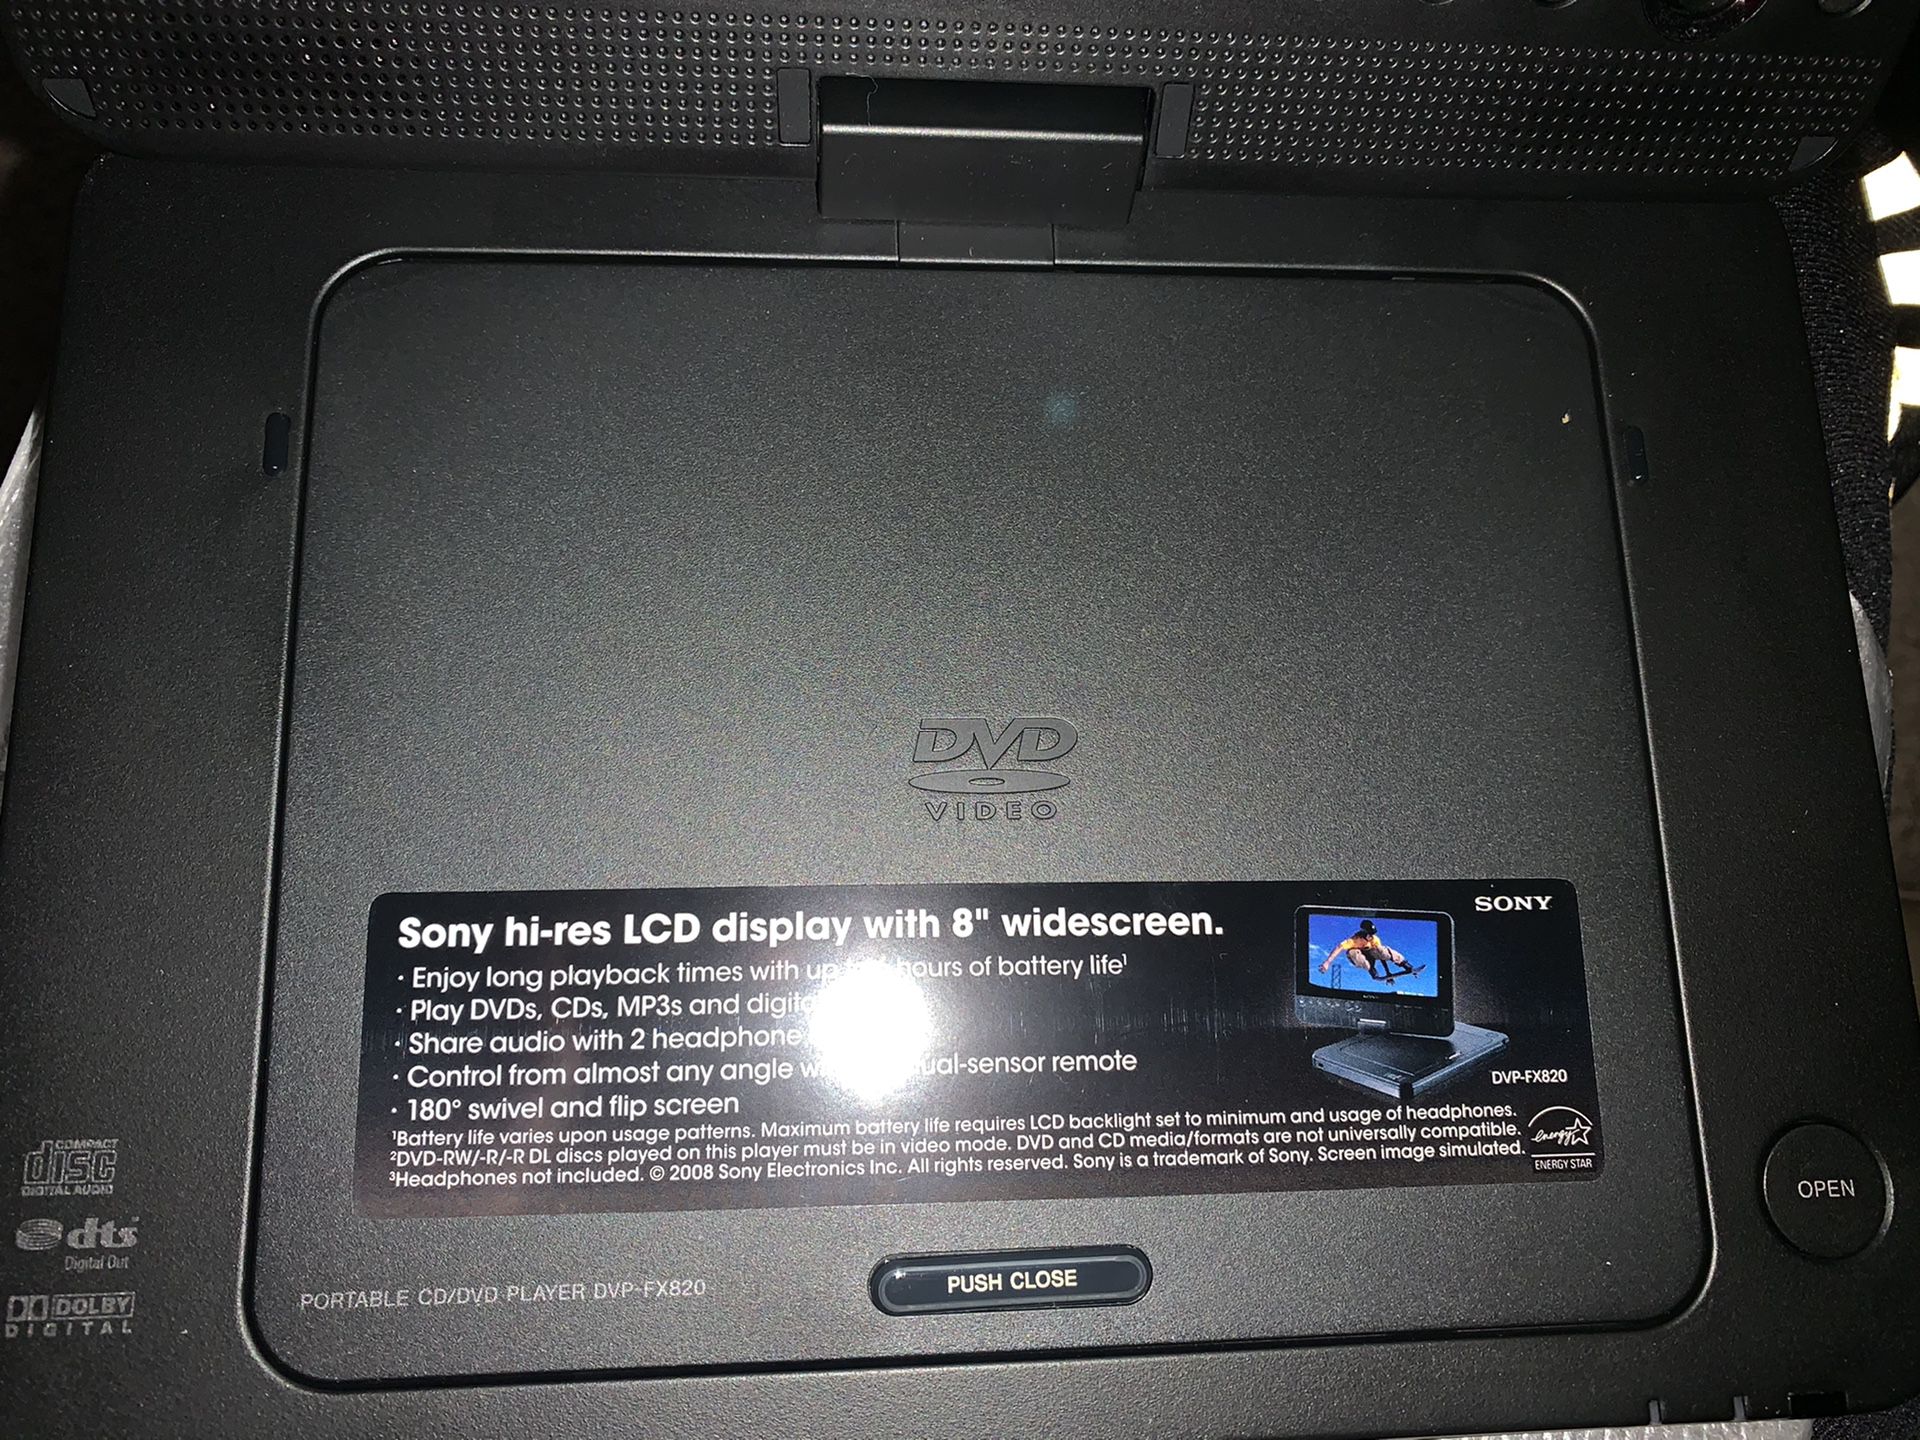 Portable DVD Player with SONY head phones